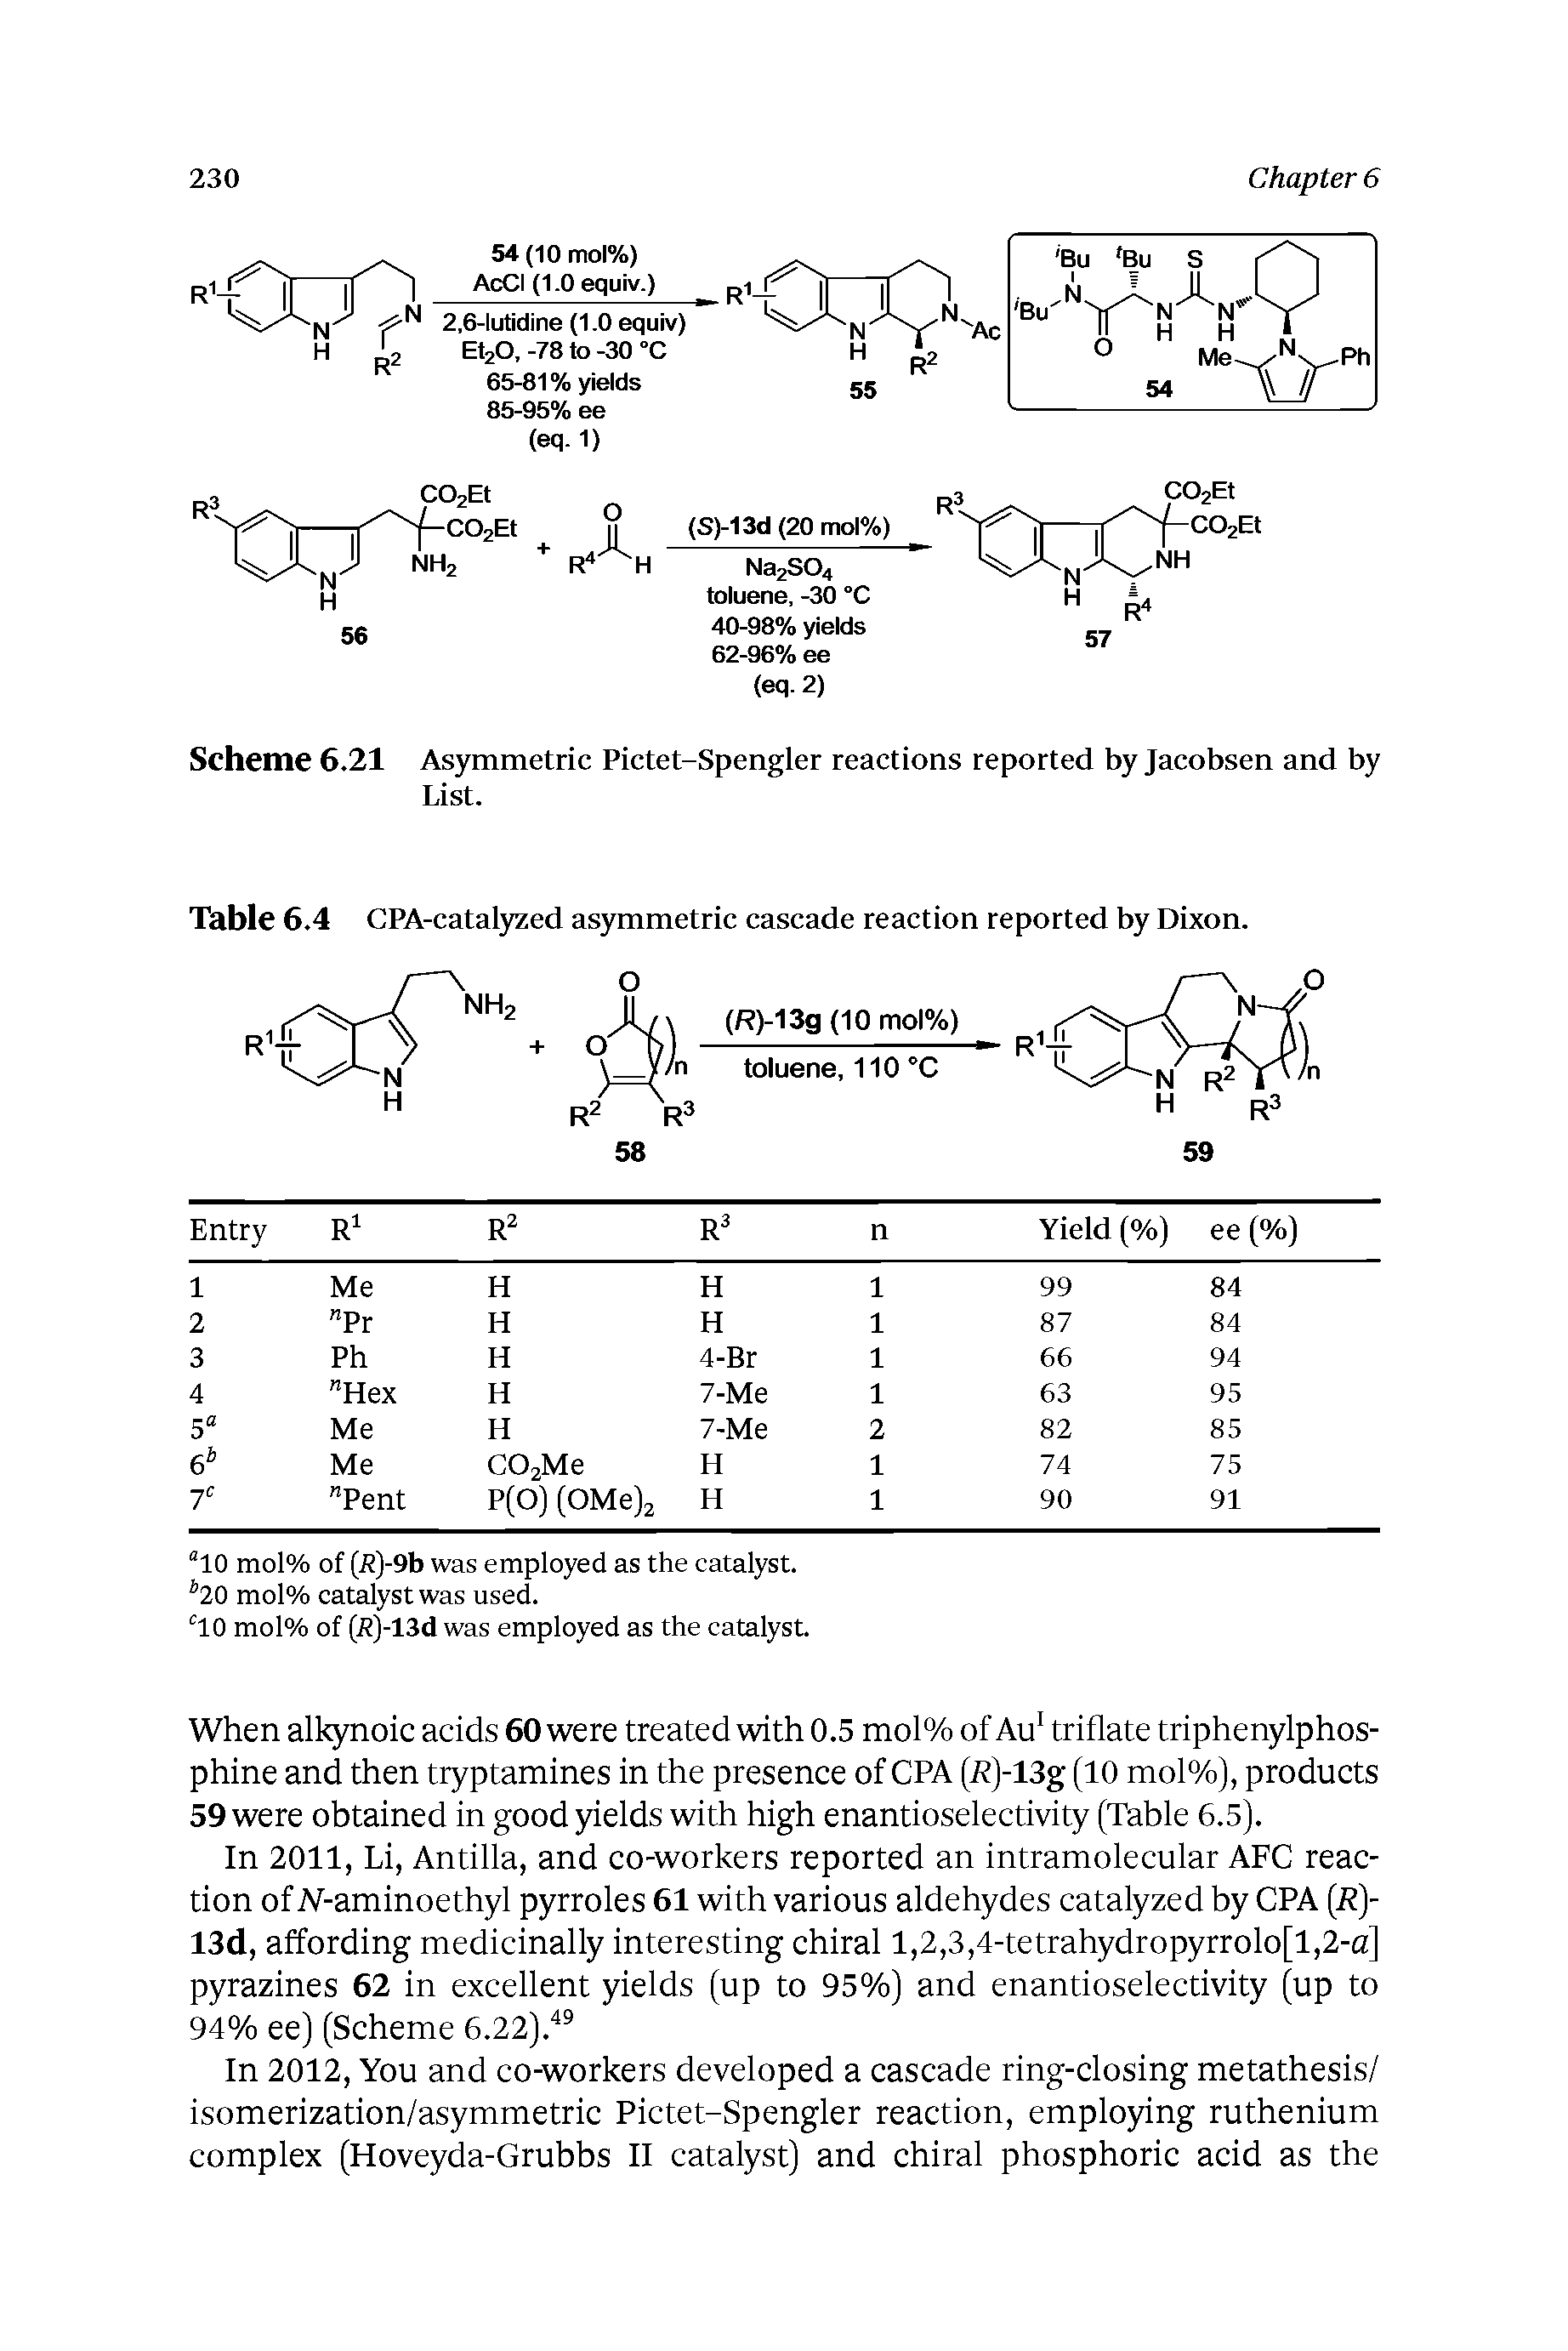 Scheme 6.21 Asymmetric Pictet-Spengler reactions reported by Jacobsen and by List.